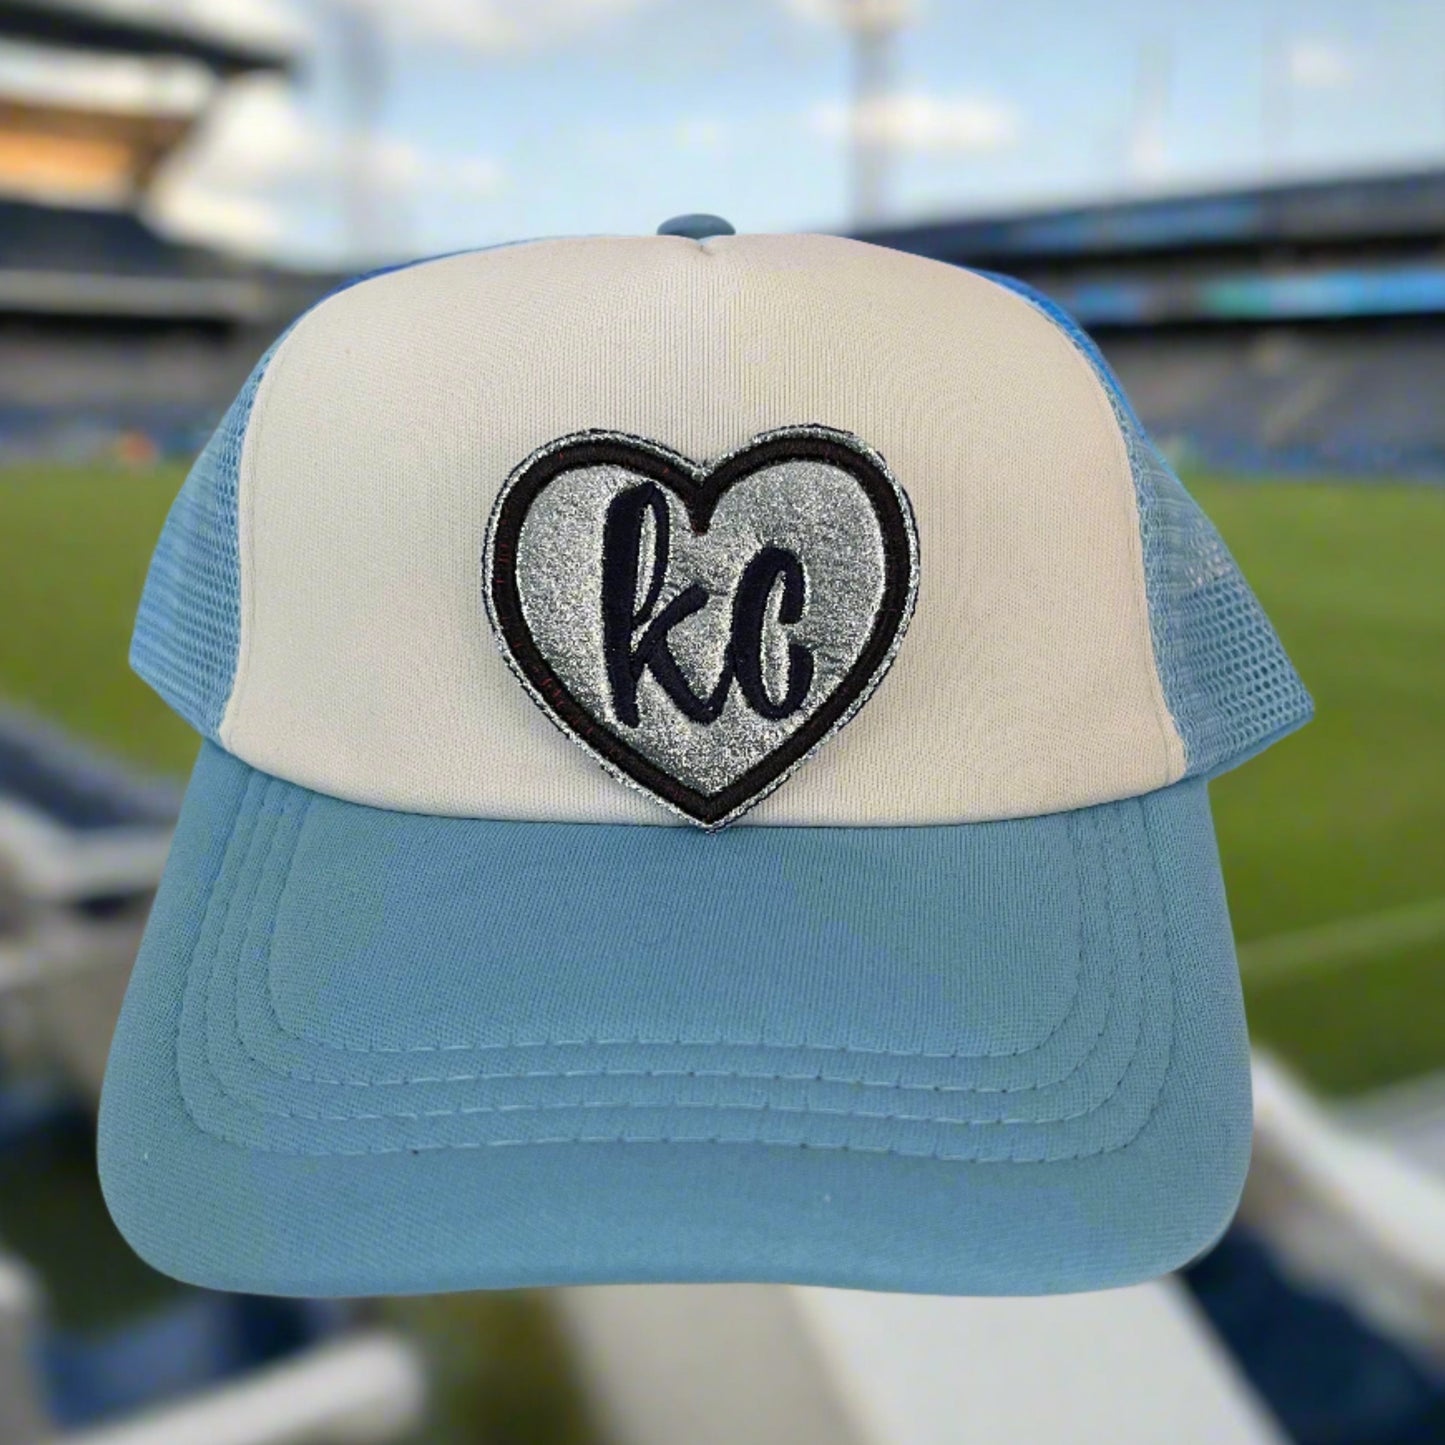 Heart KC iron-on patch in Sporting KC team colors, perfect for adding a touch of local pride to any apparel.